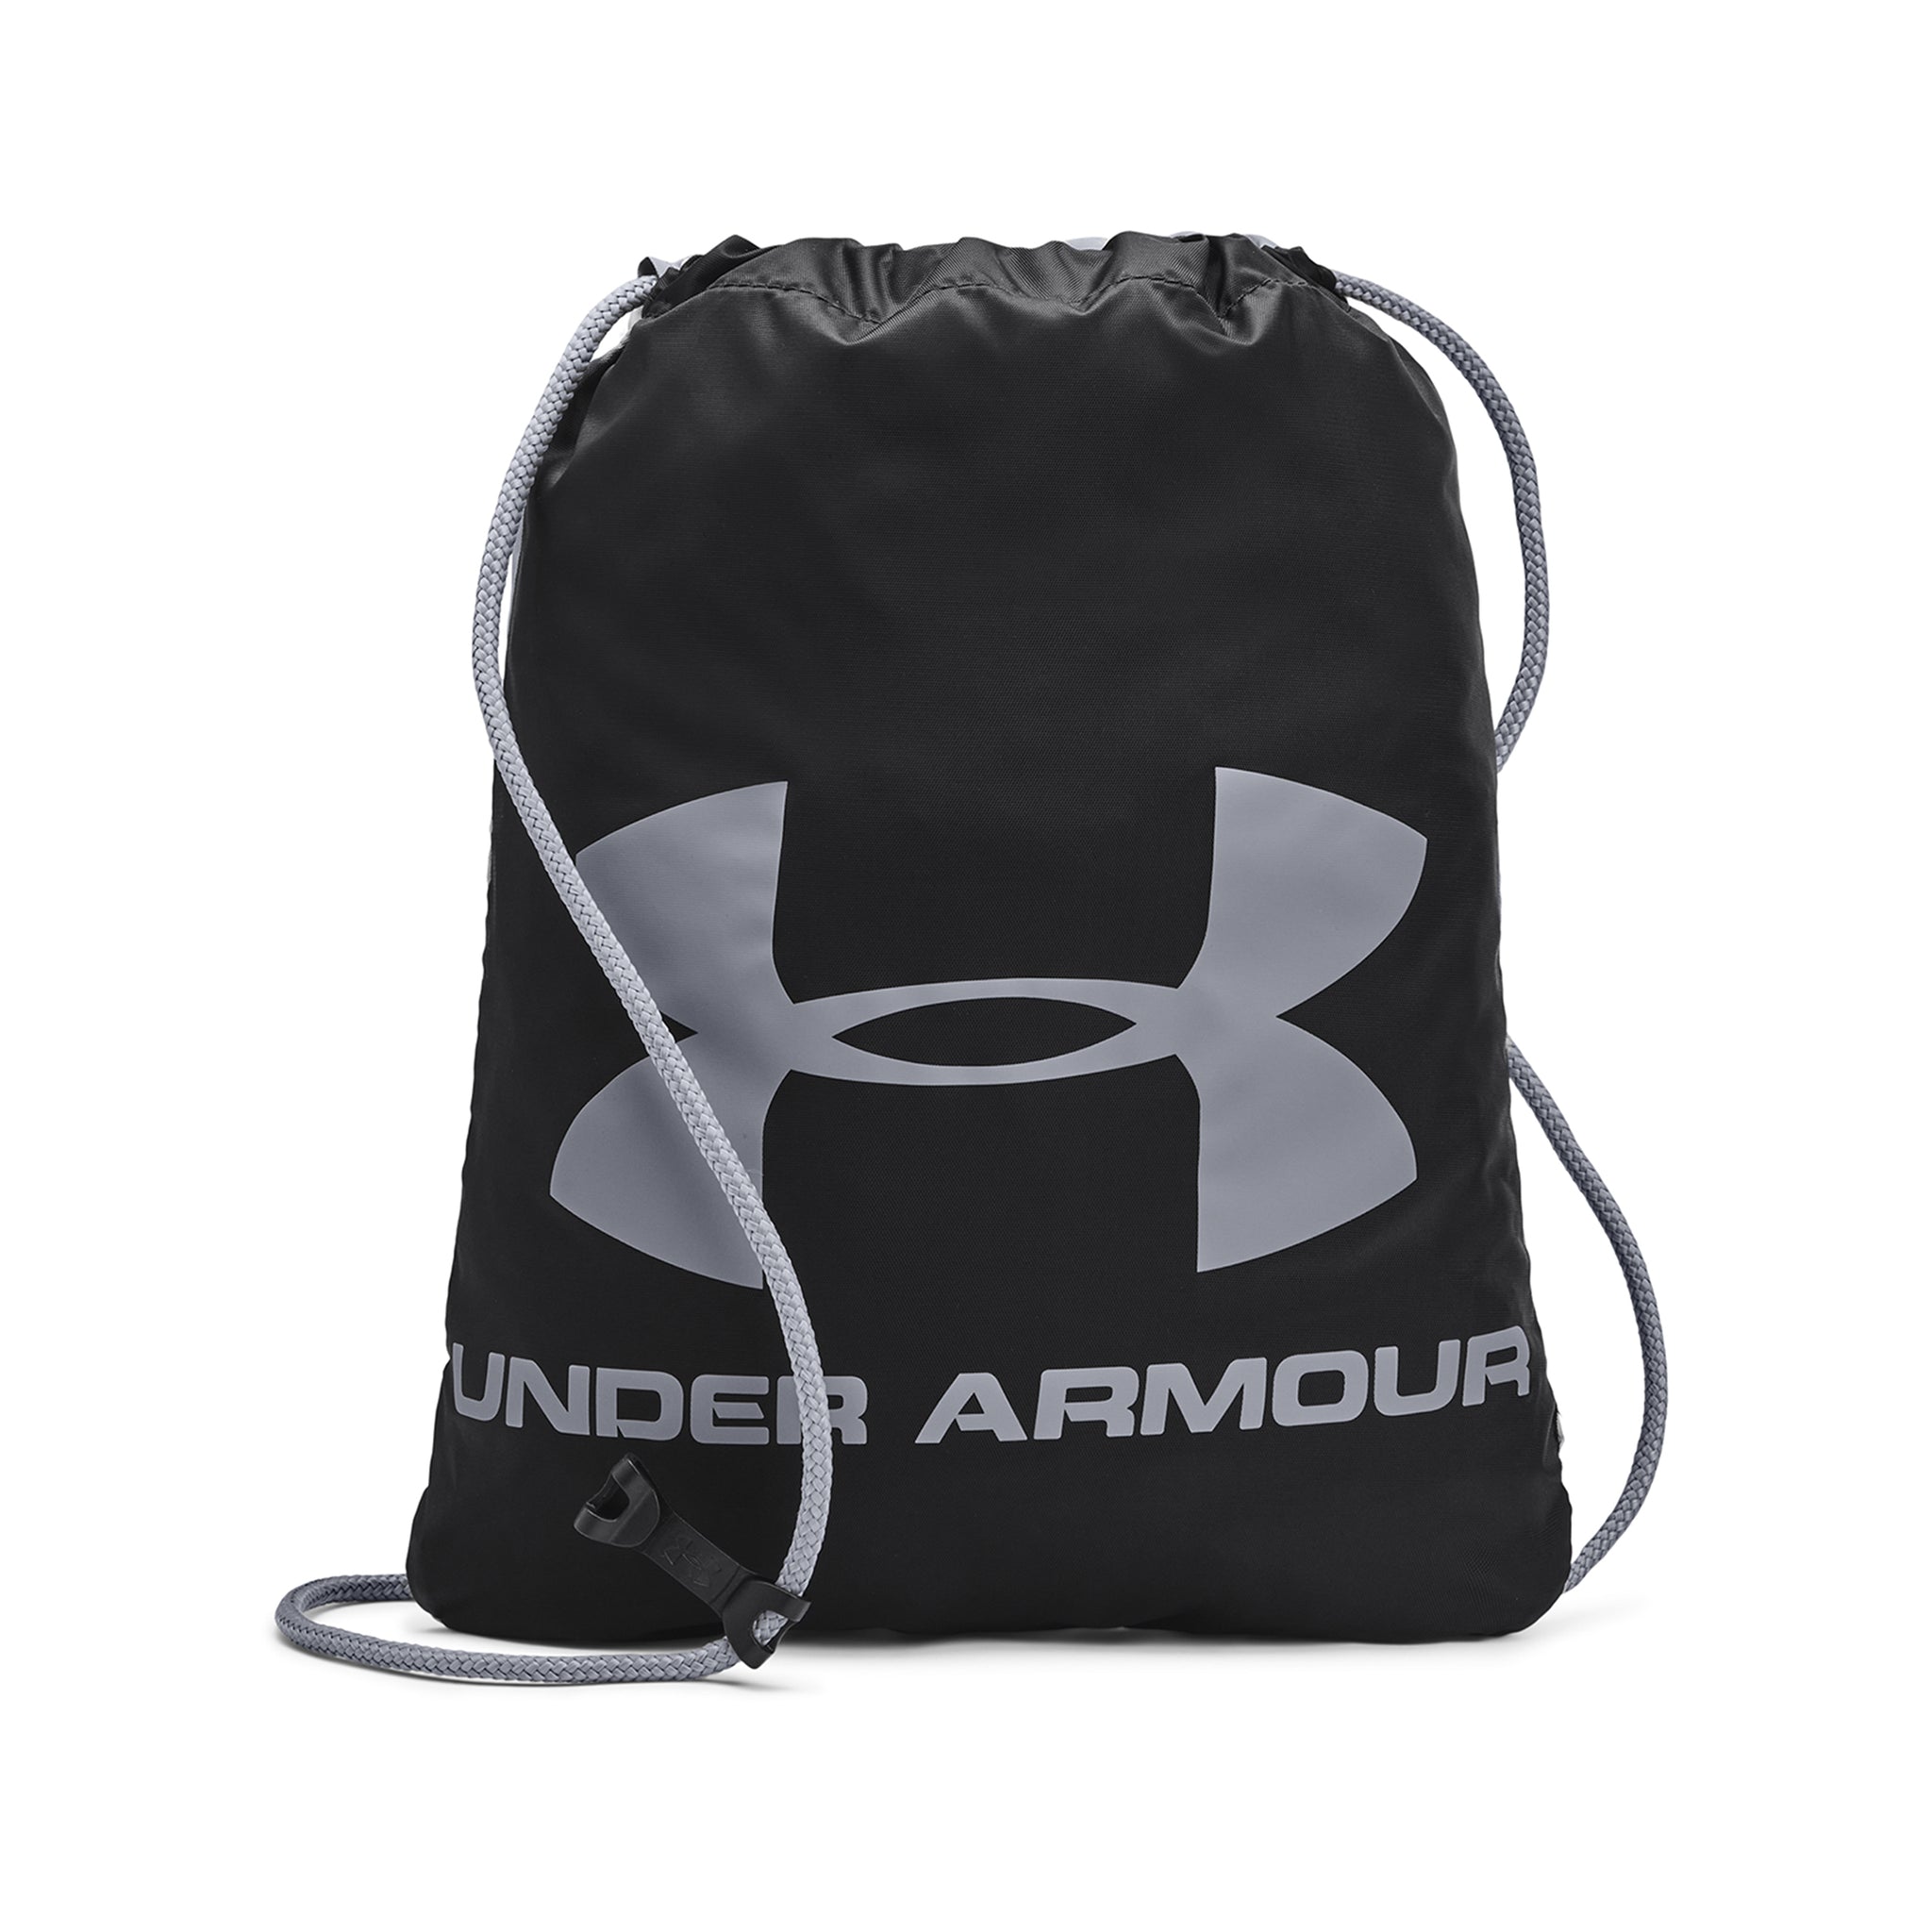 under-armour-ozsee-sackpack-1240539-black-009